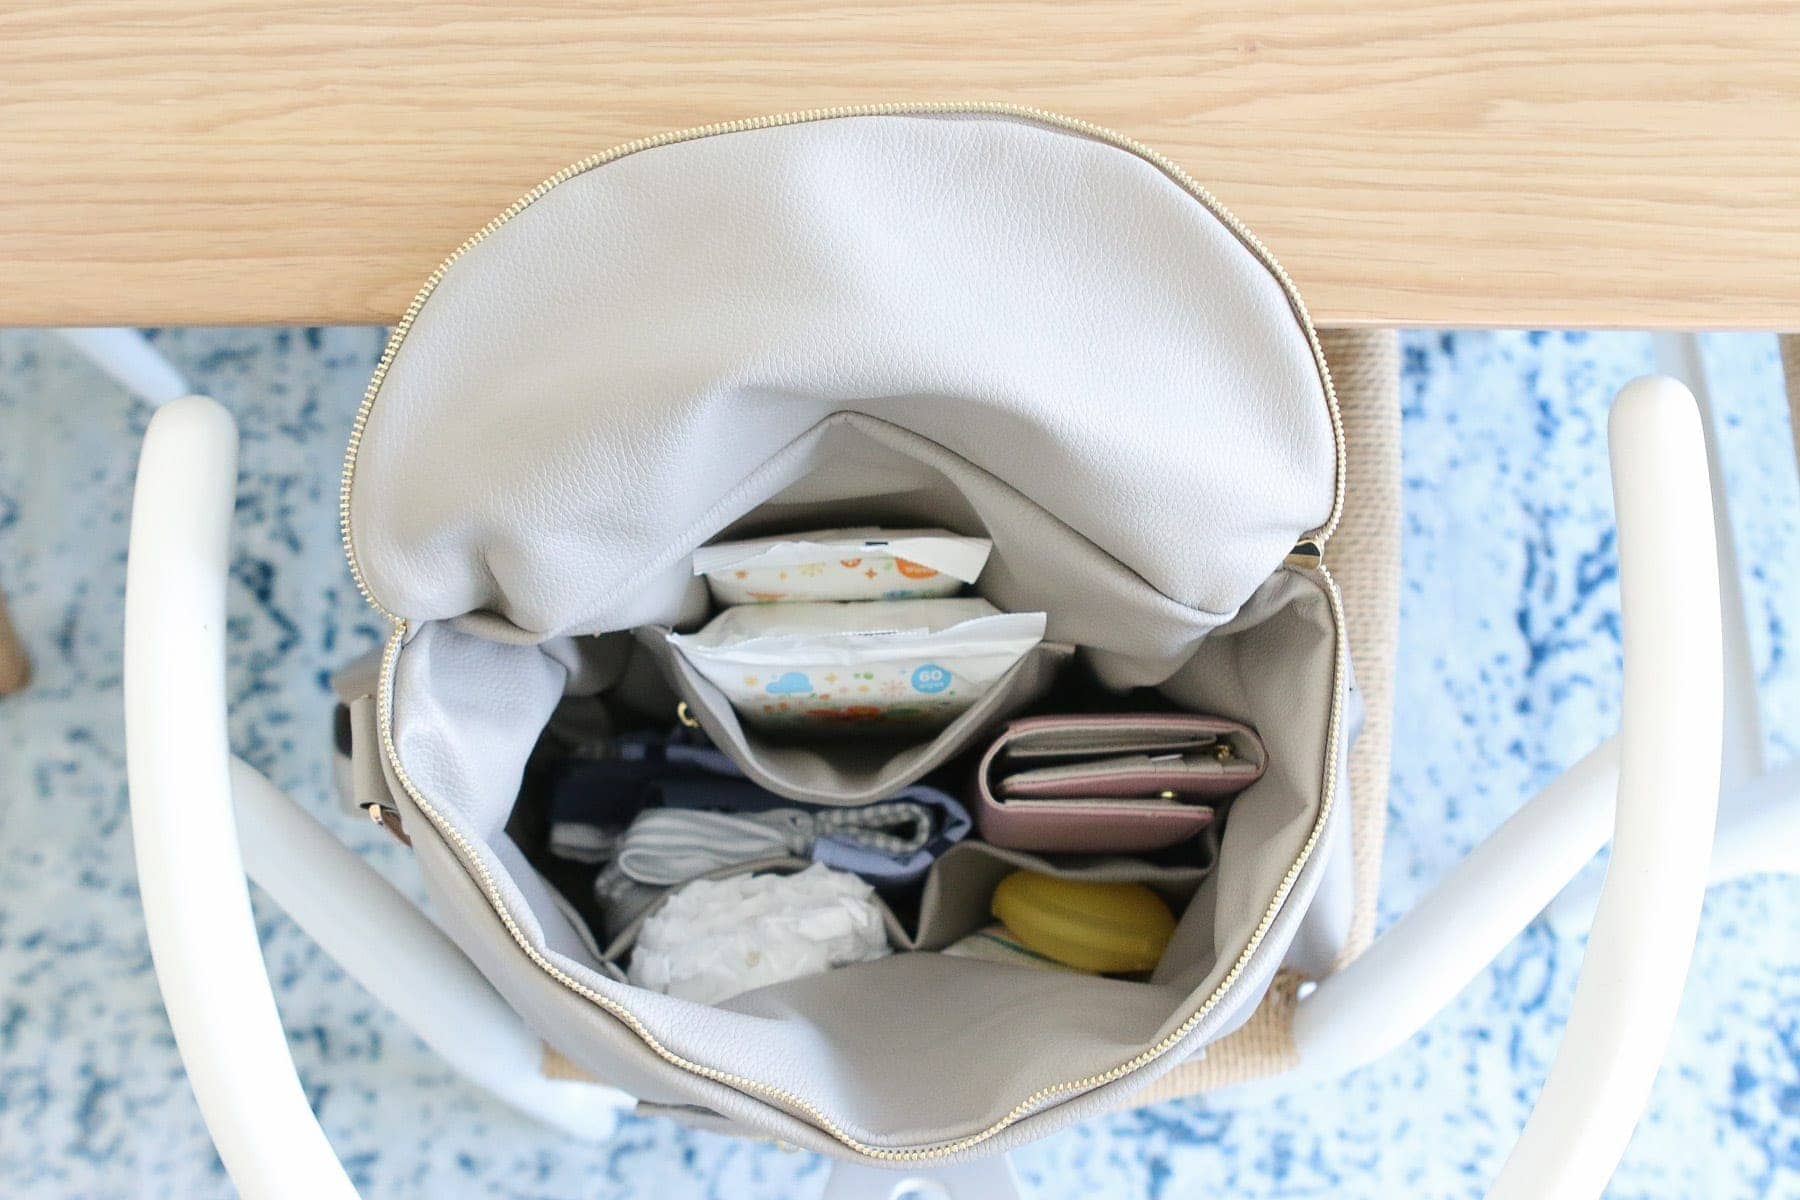 What to pack in a diaper bag?